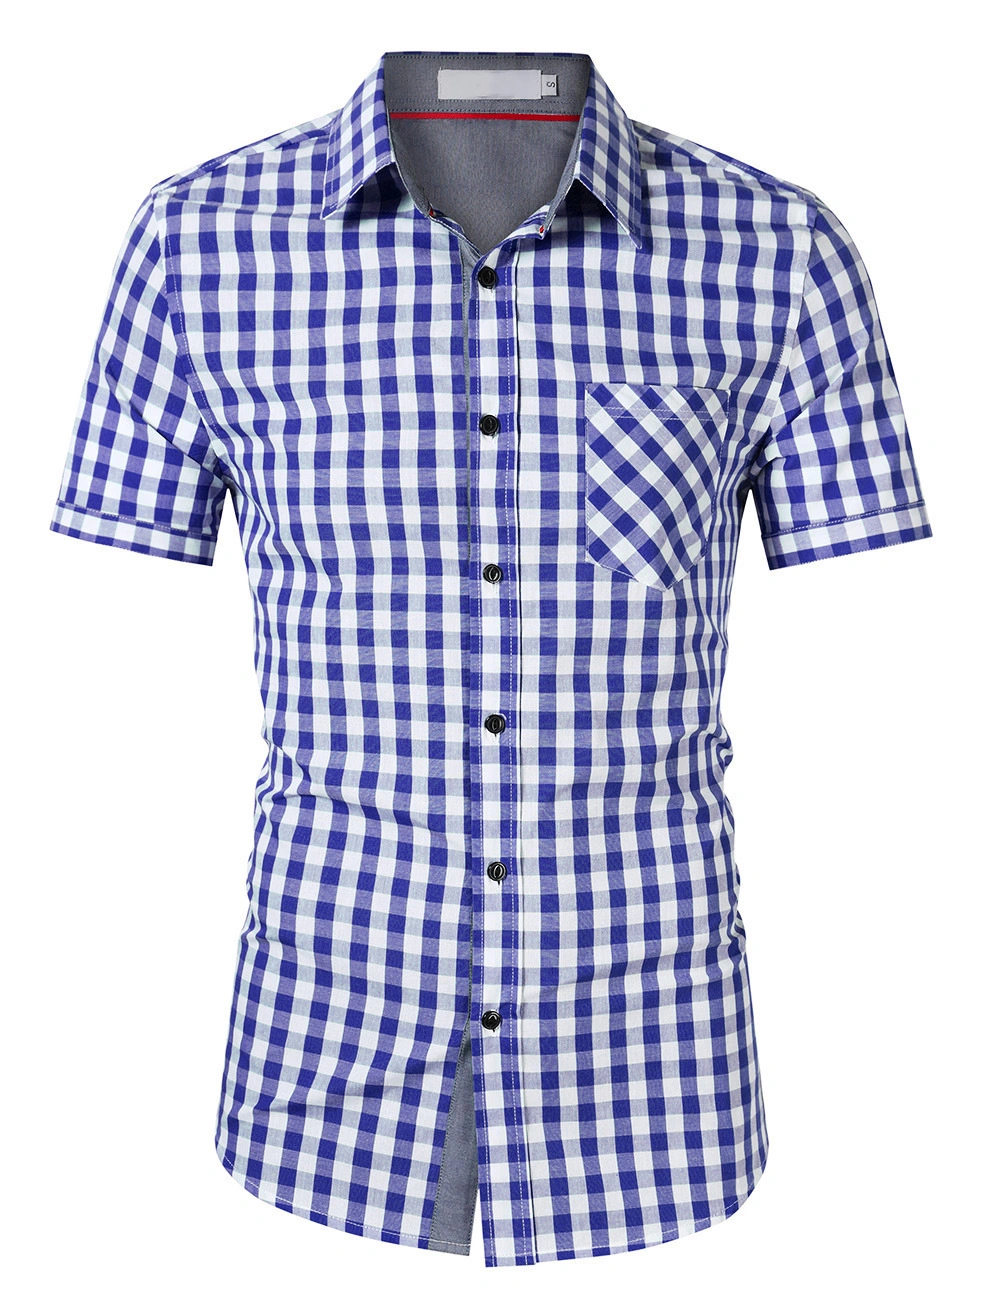 Wholesale Woven Shirts Manufacturers in Bangladesh